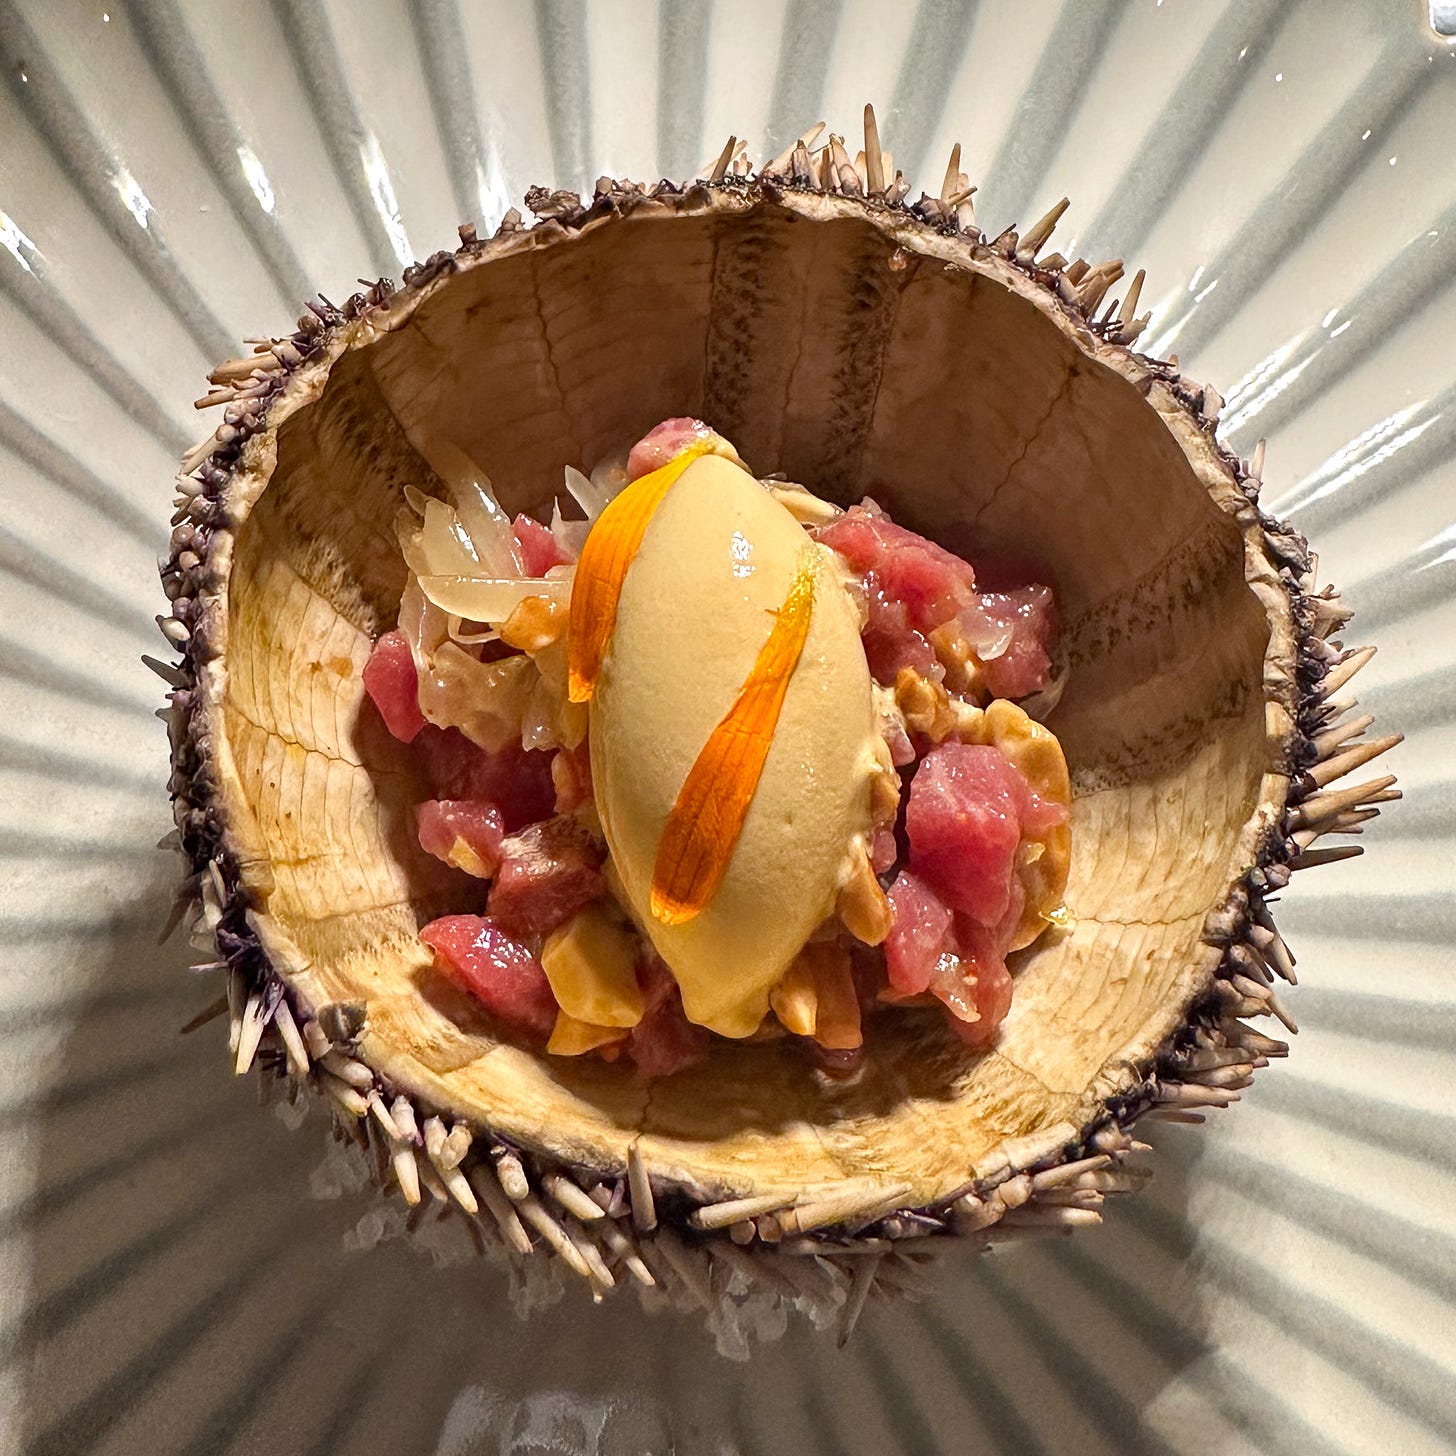 smoked veal tartare with sea urchin ice cream and peanuts at Amalia restaurant in Paris